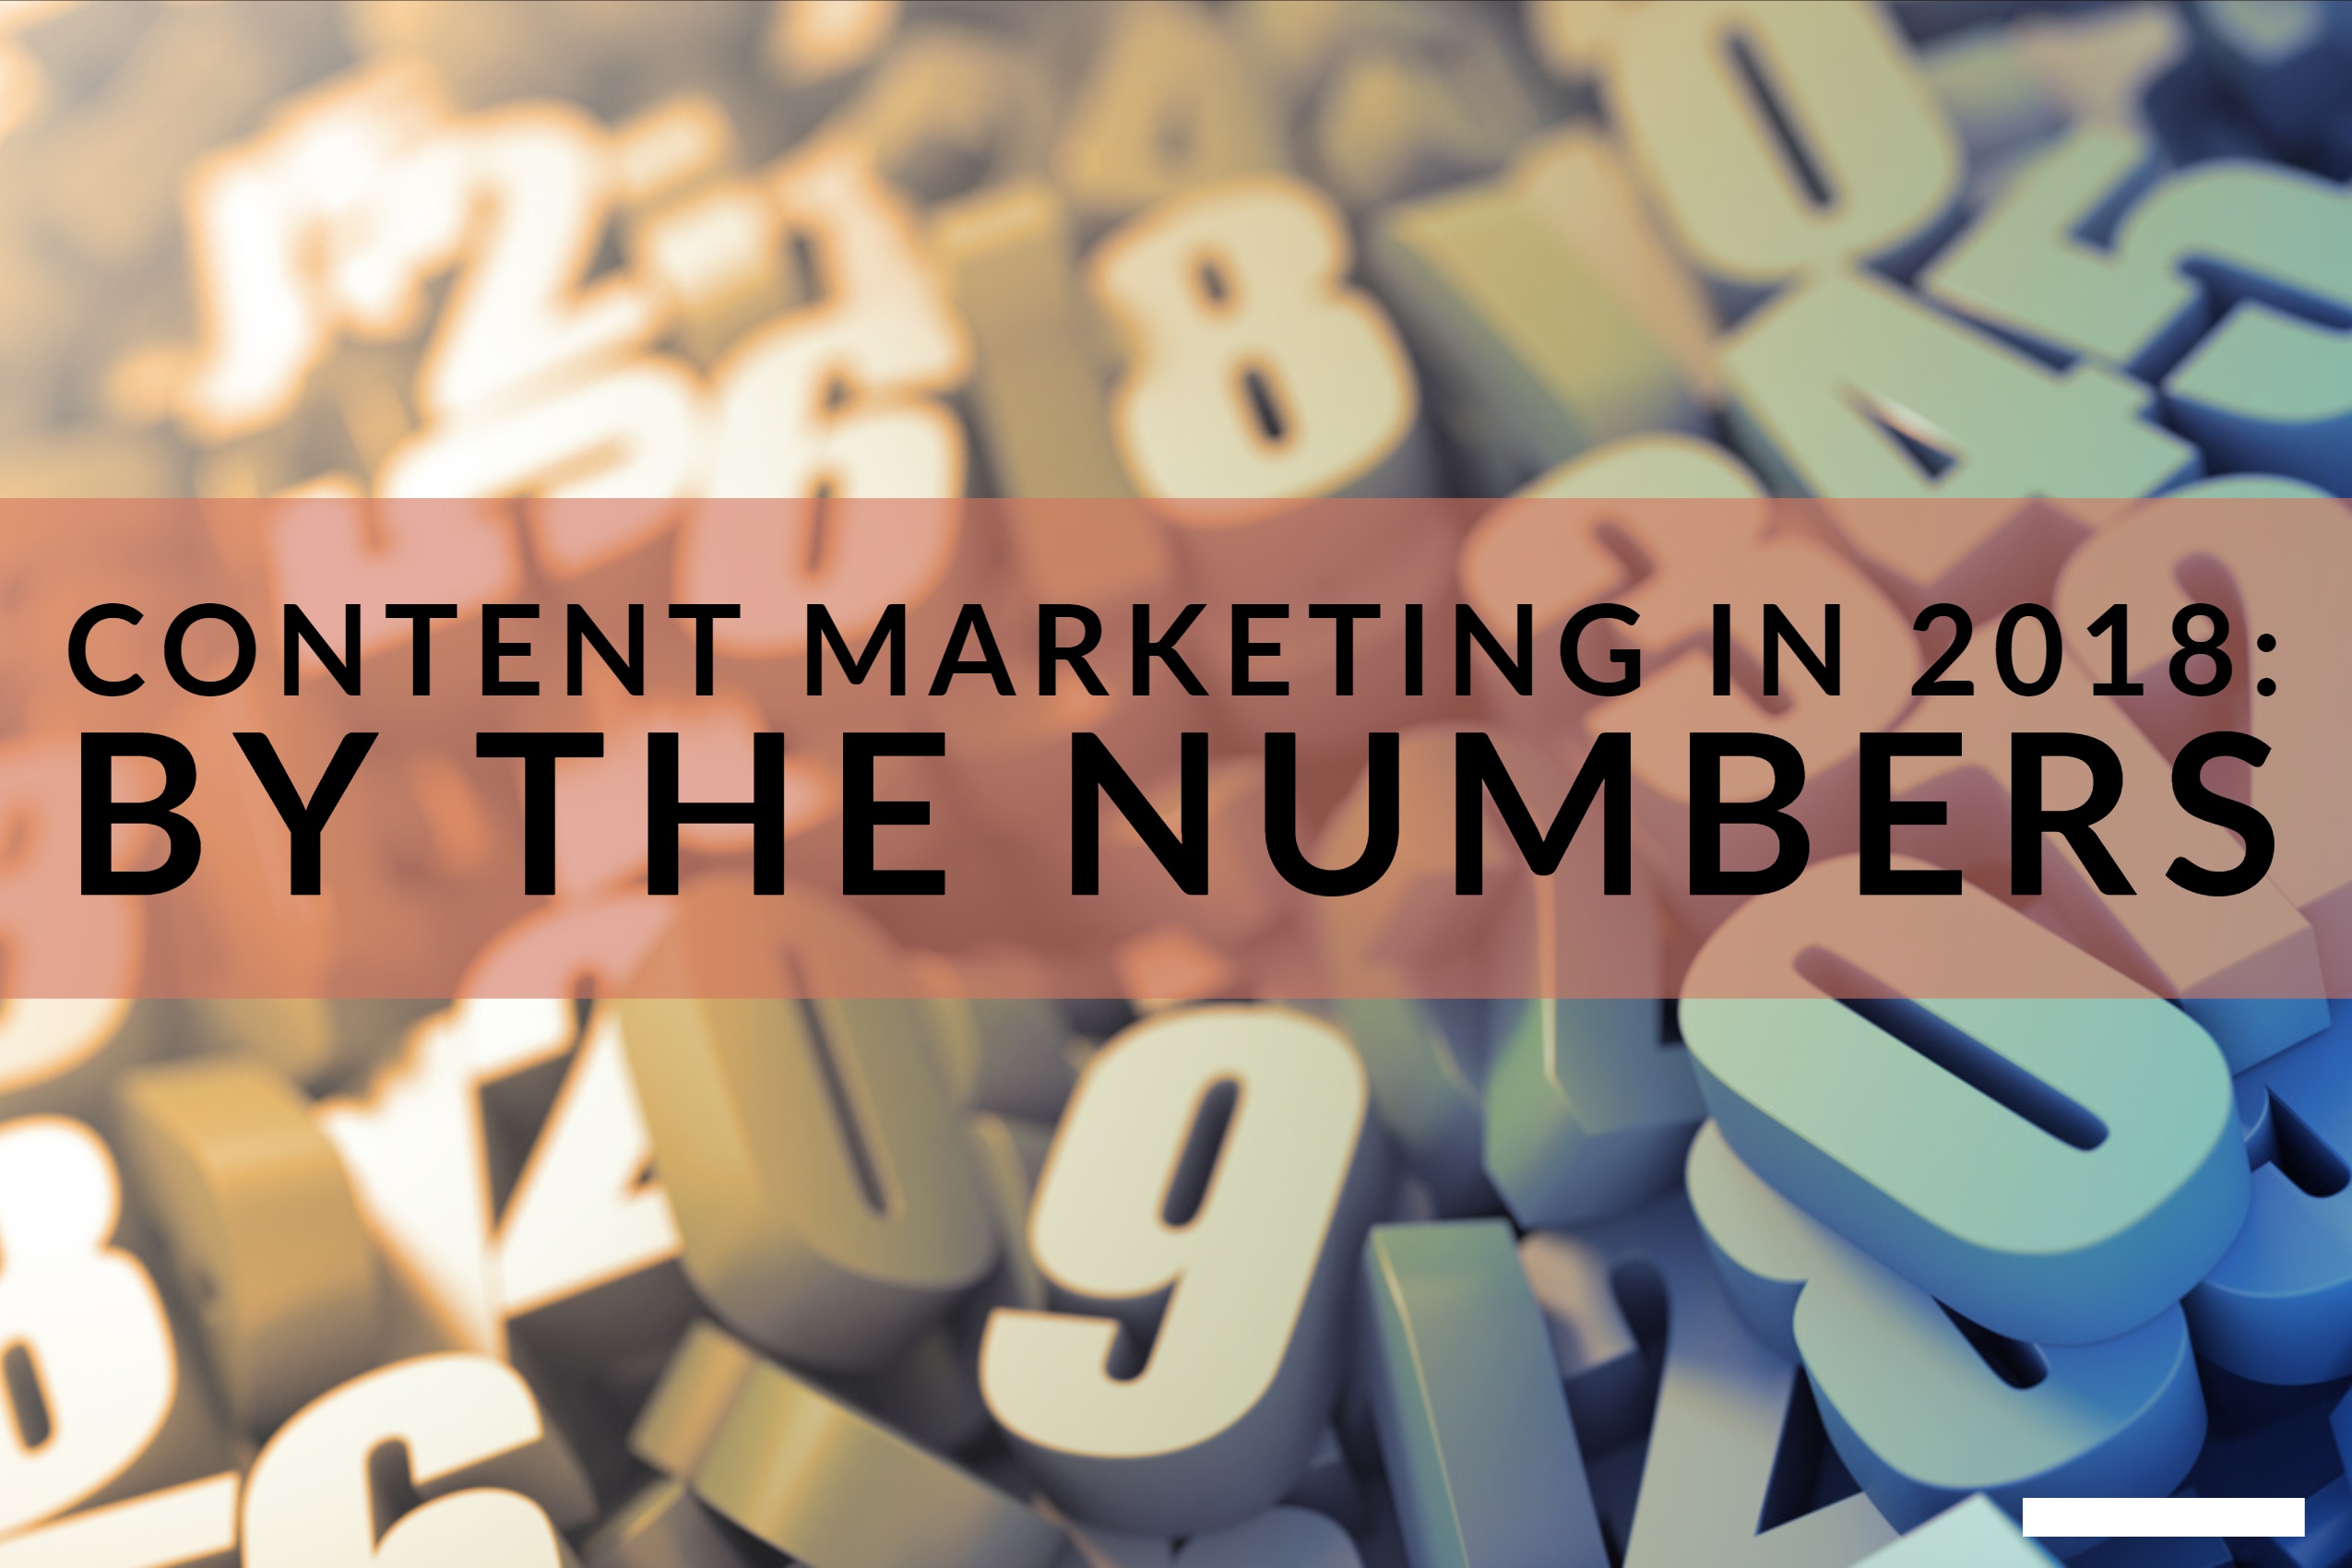 Content Marketing in 2018: By The Numbers